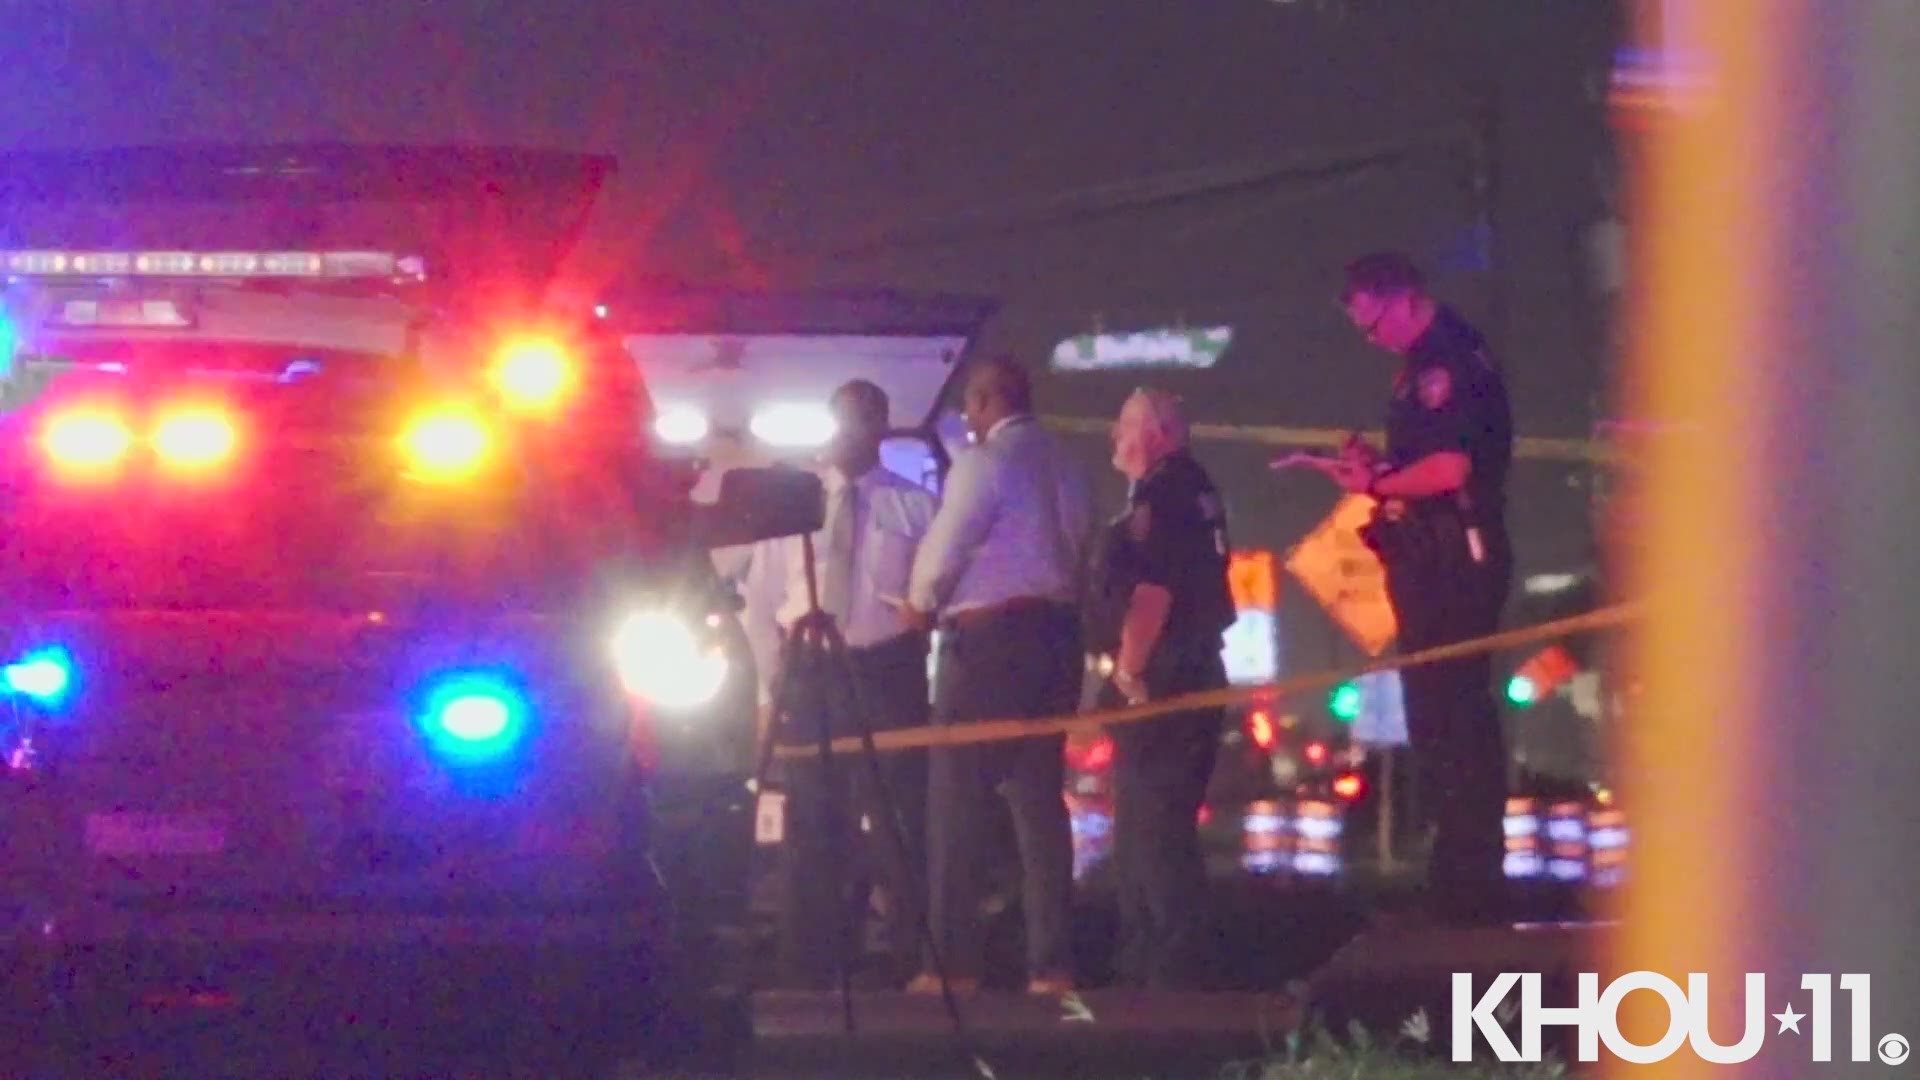 Harris County Sheriff’s deputies are investigating after one person was shot and killed Saturday night during an apparent road rage incident.